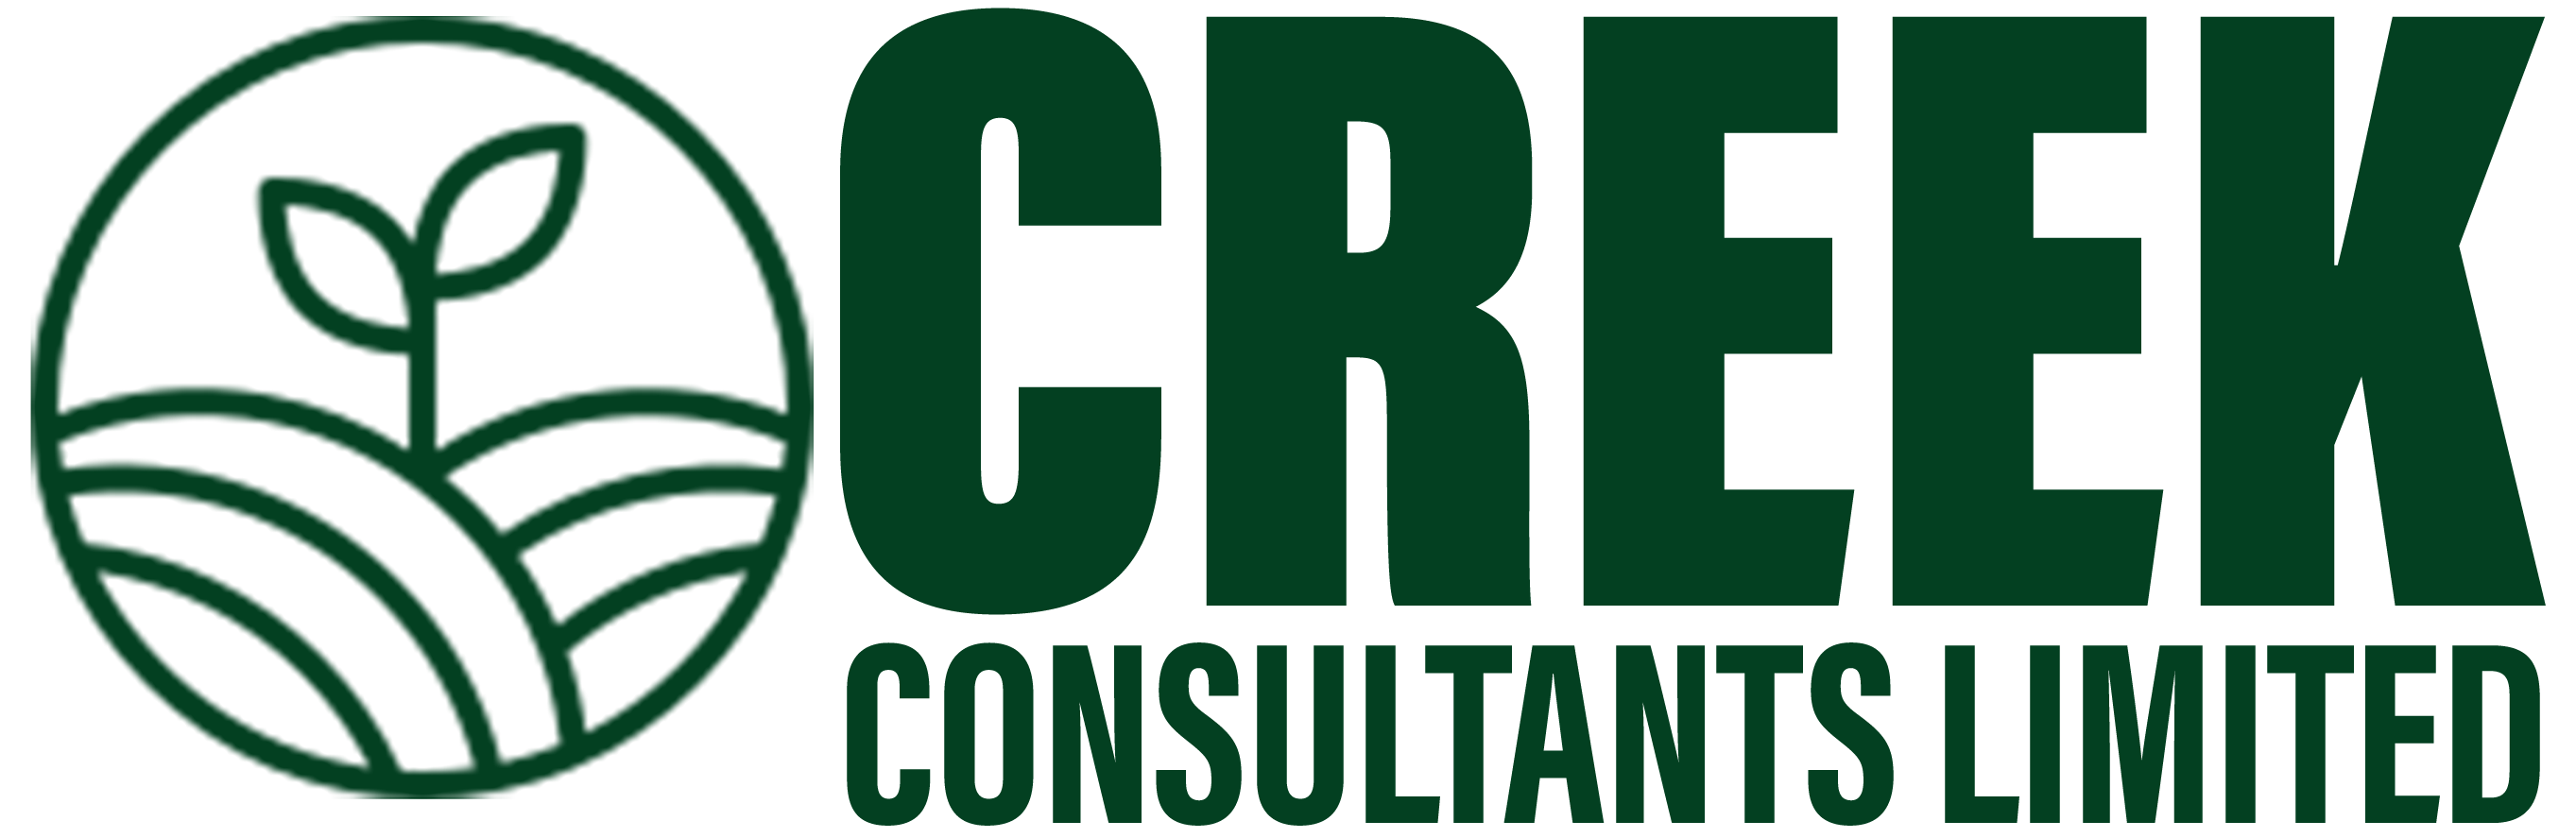 Creek Consultants Limited